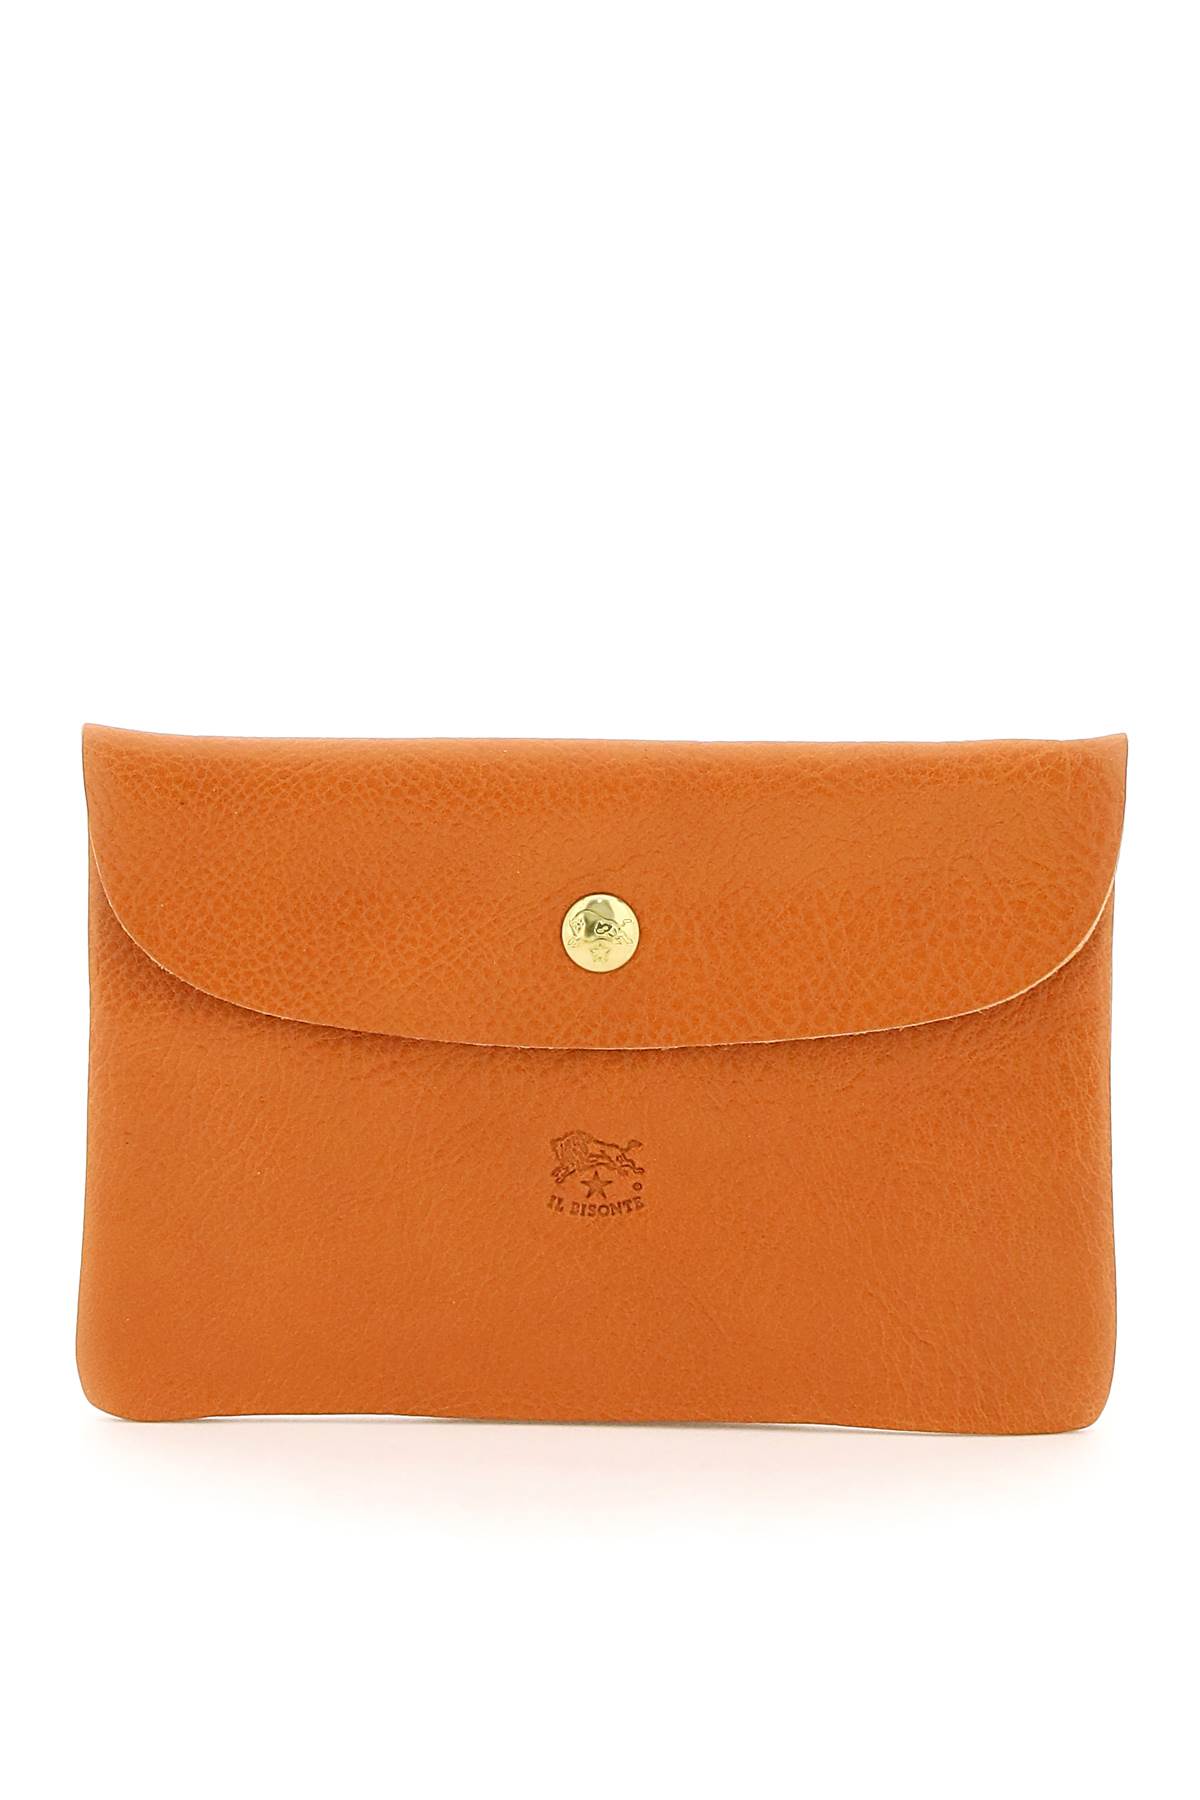 Il Bisonte Leather Pouch